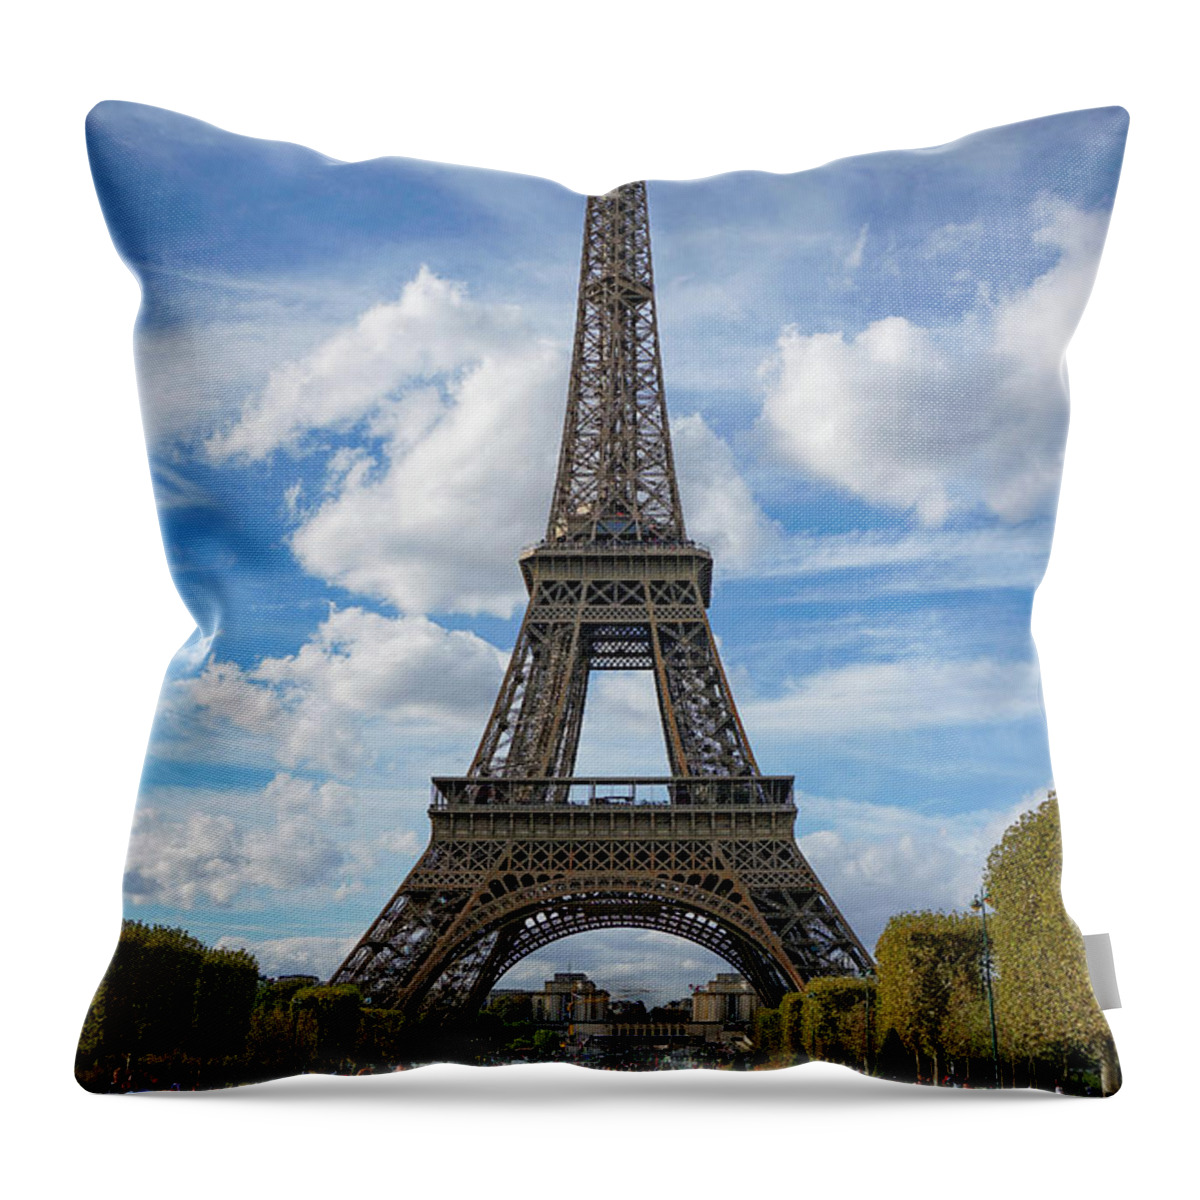 Eiffel Tower Throw Pillow featuring the photograph Eiffel Tower by Jim Mathis